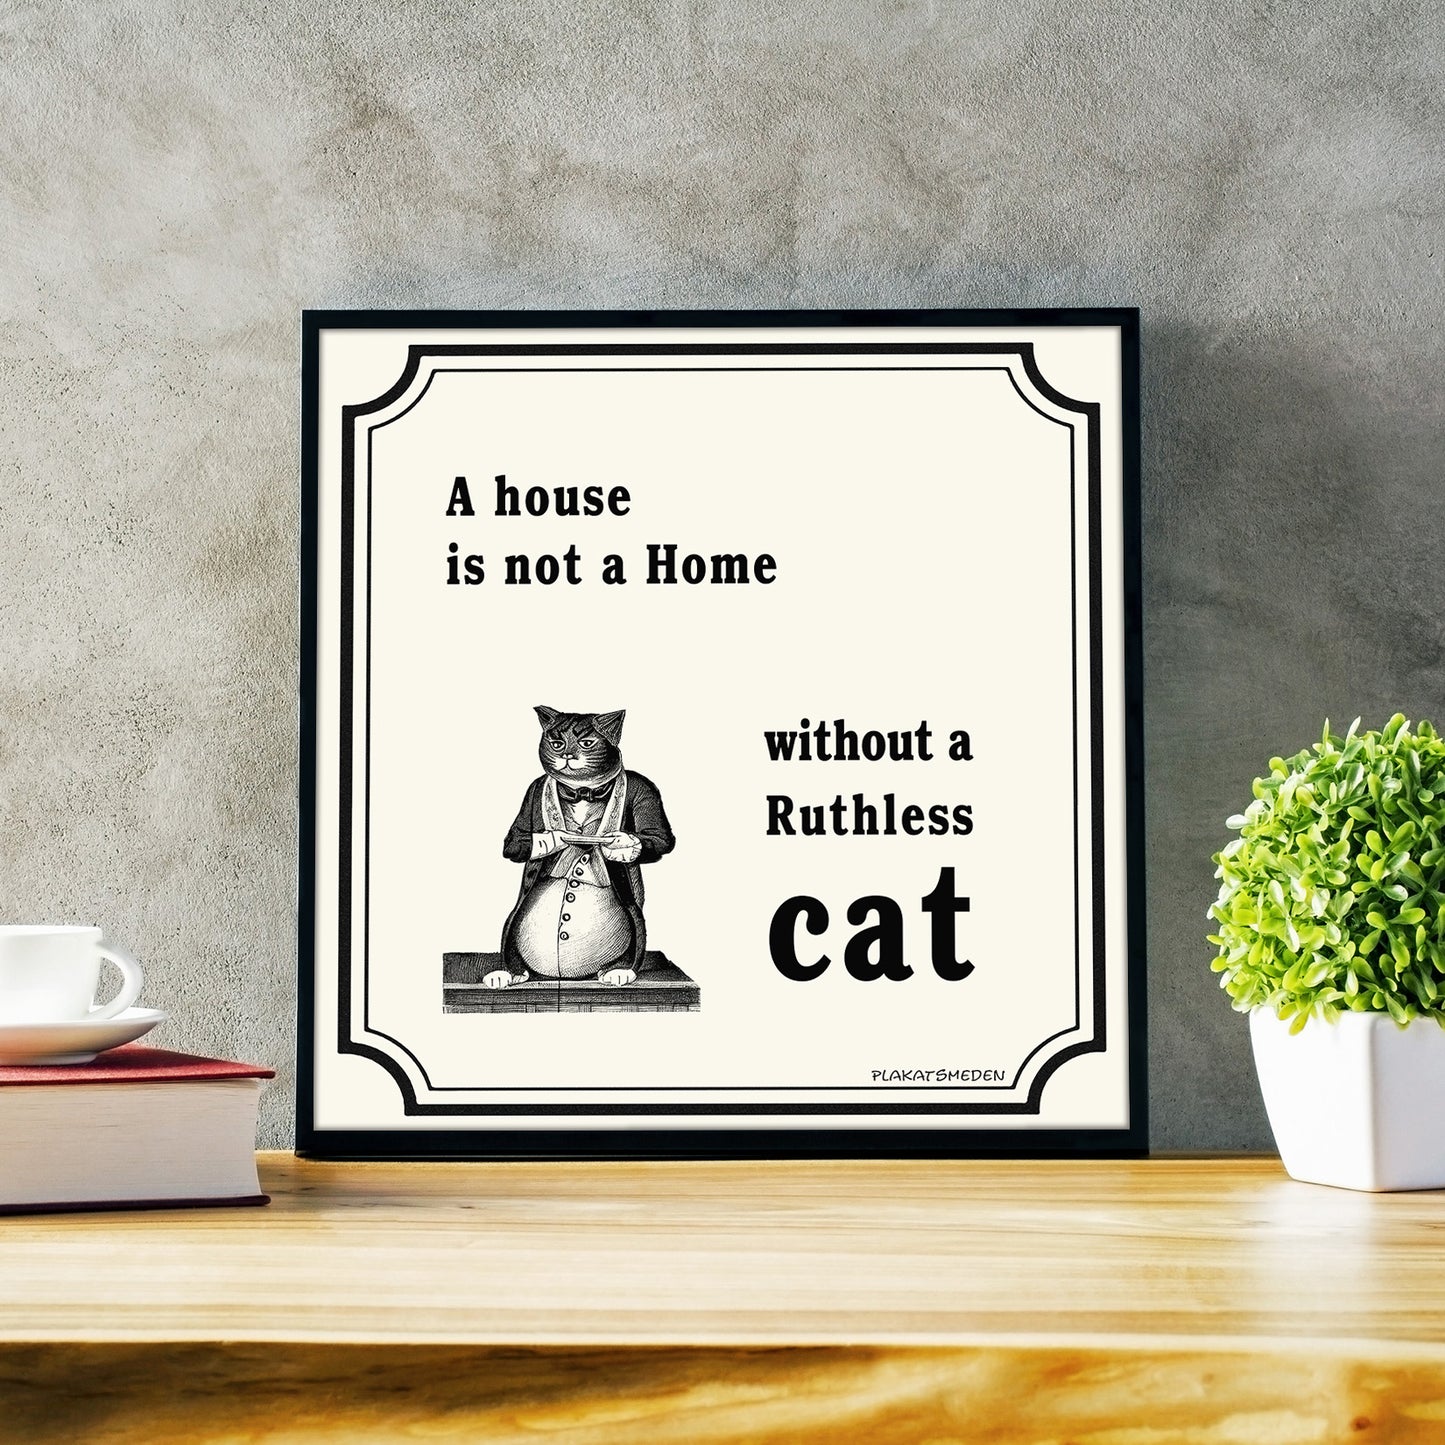 A house is not a home without a ruthless cat